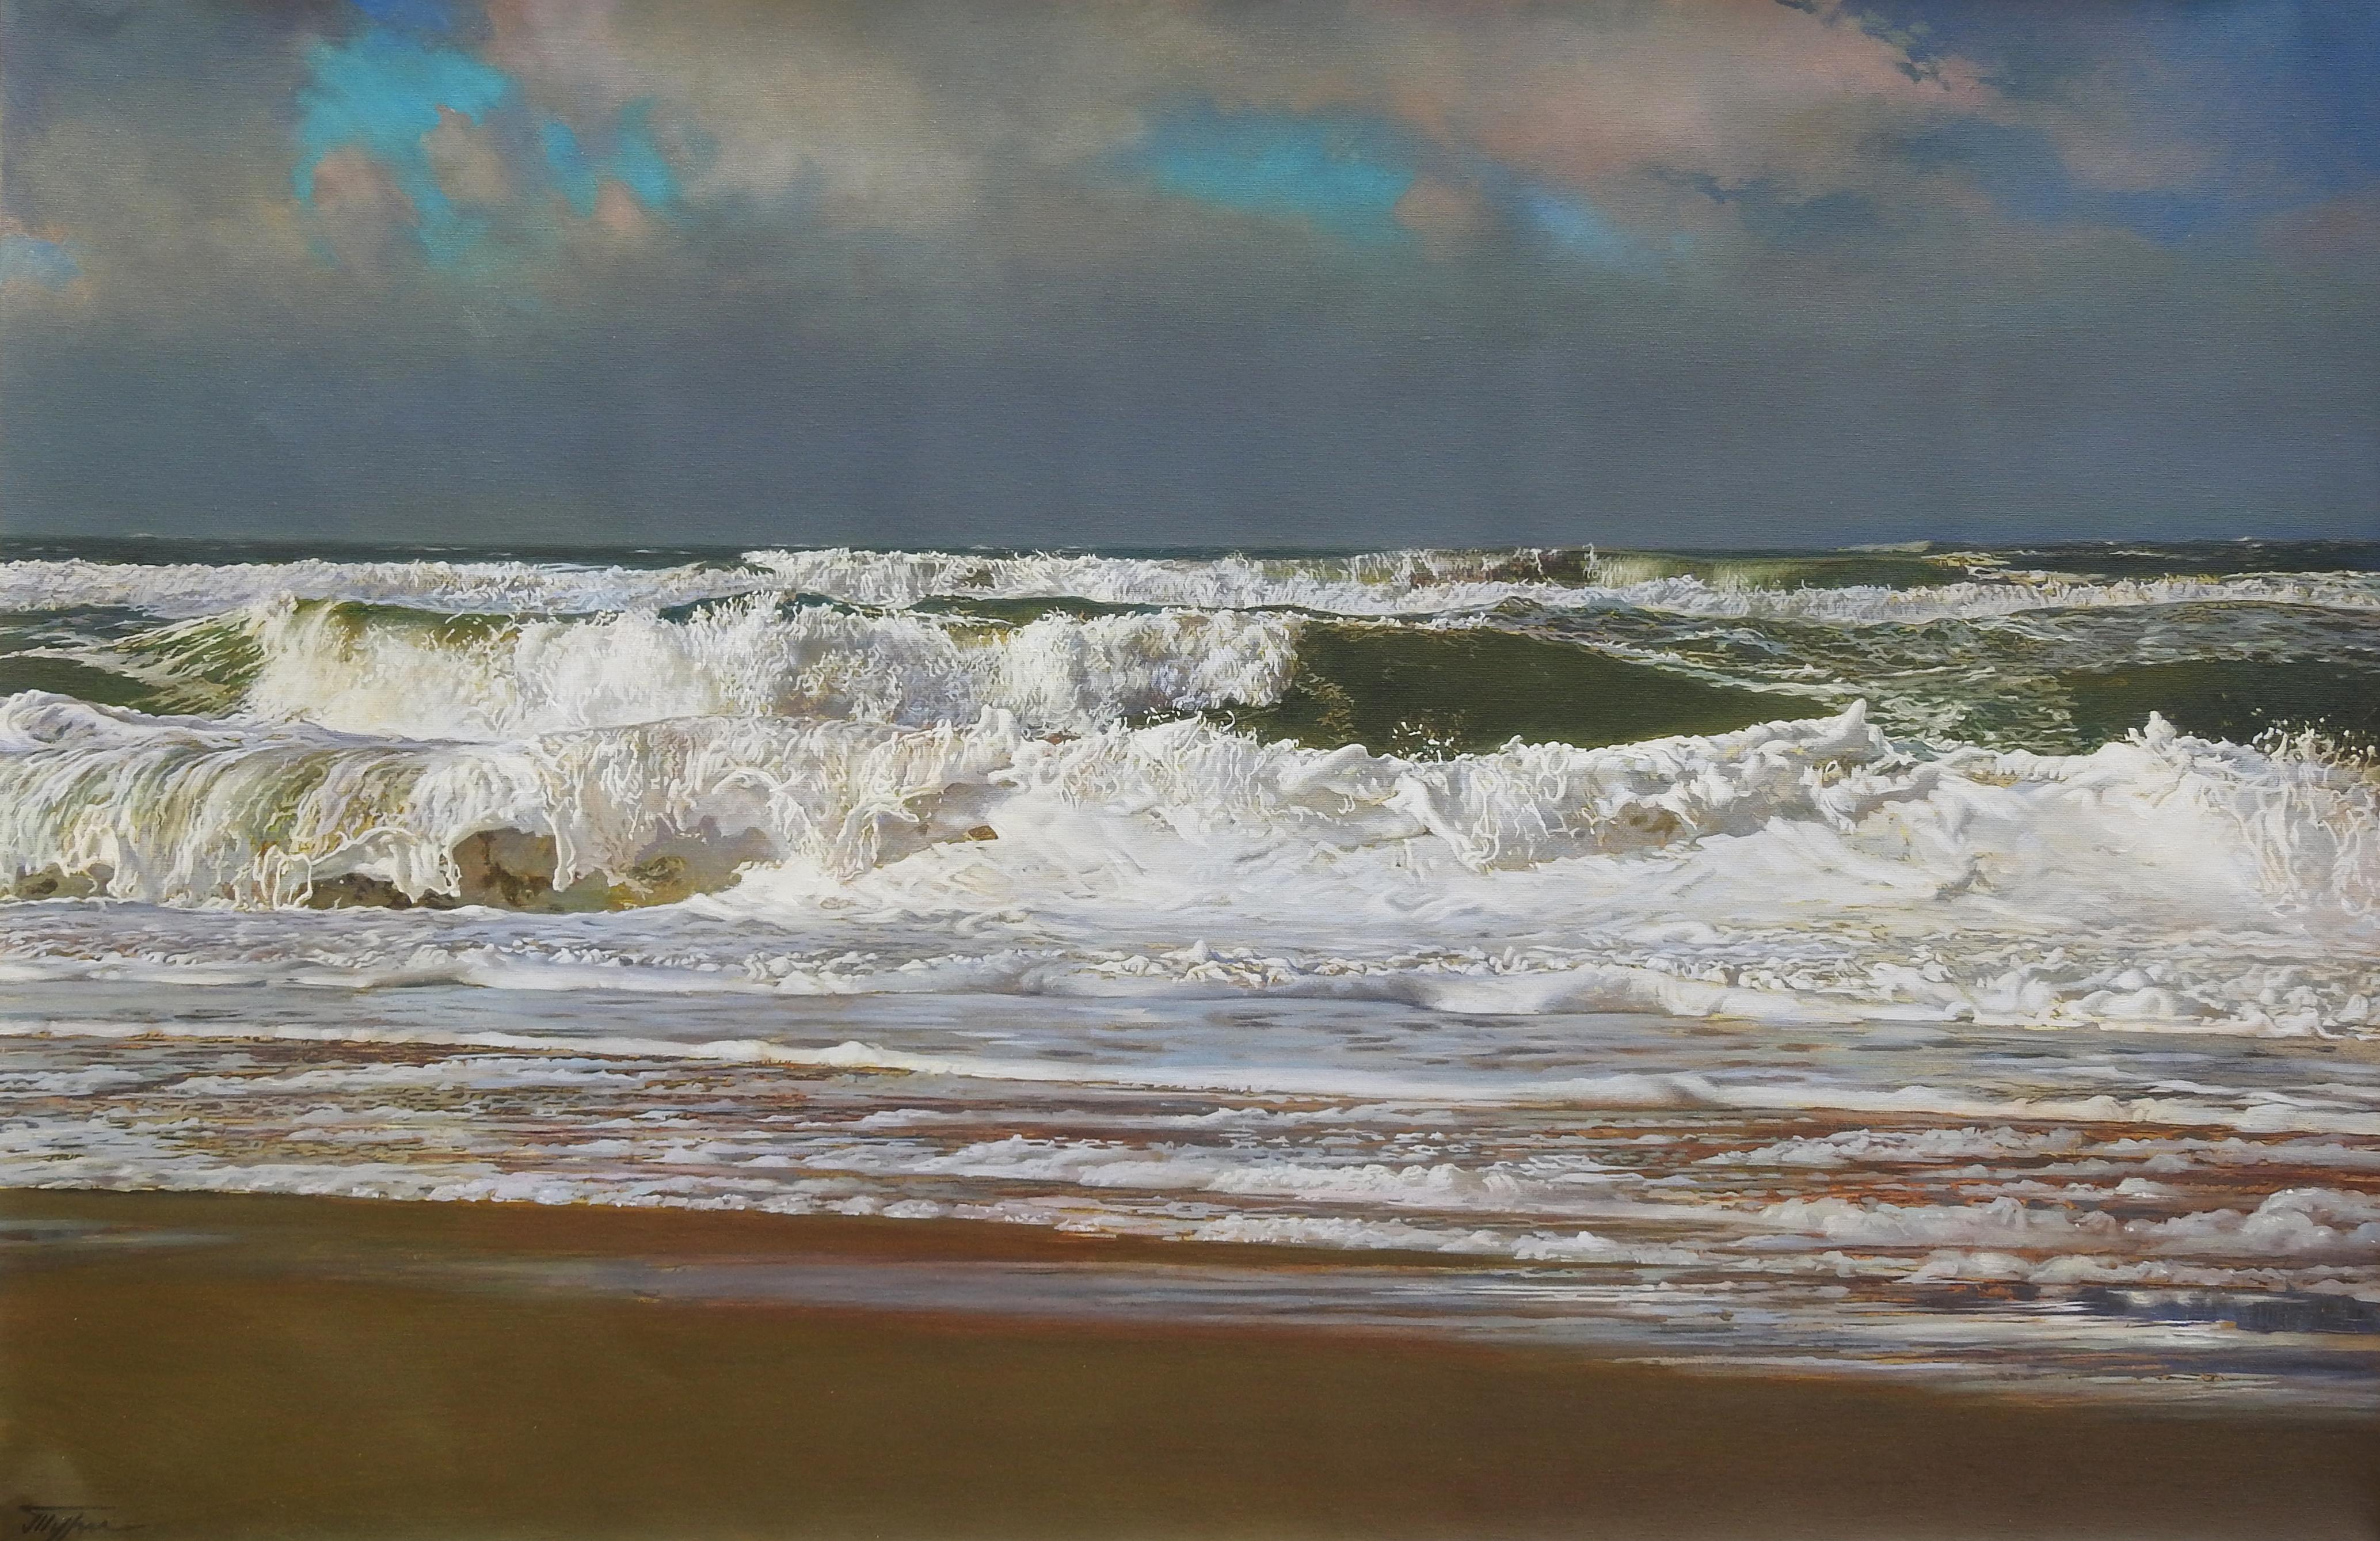 Oleg Turchin's "Sea" is an oil on canvas that measures 30" x 47". The painting is a beautiful photorealistic seascape of the blue and white ocean waves crashing in on a brown sandy beach on a stormy day. The artist's attention to detail,